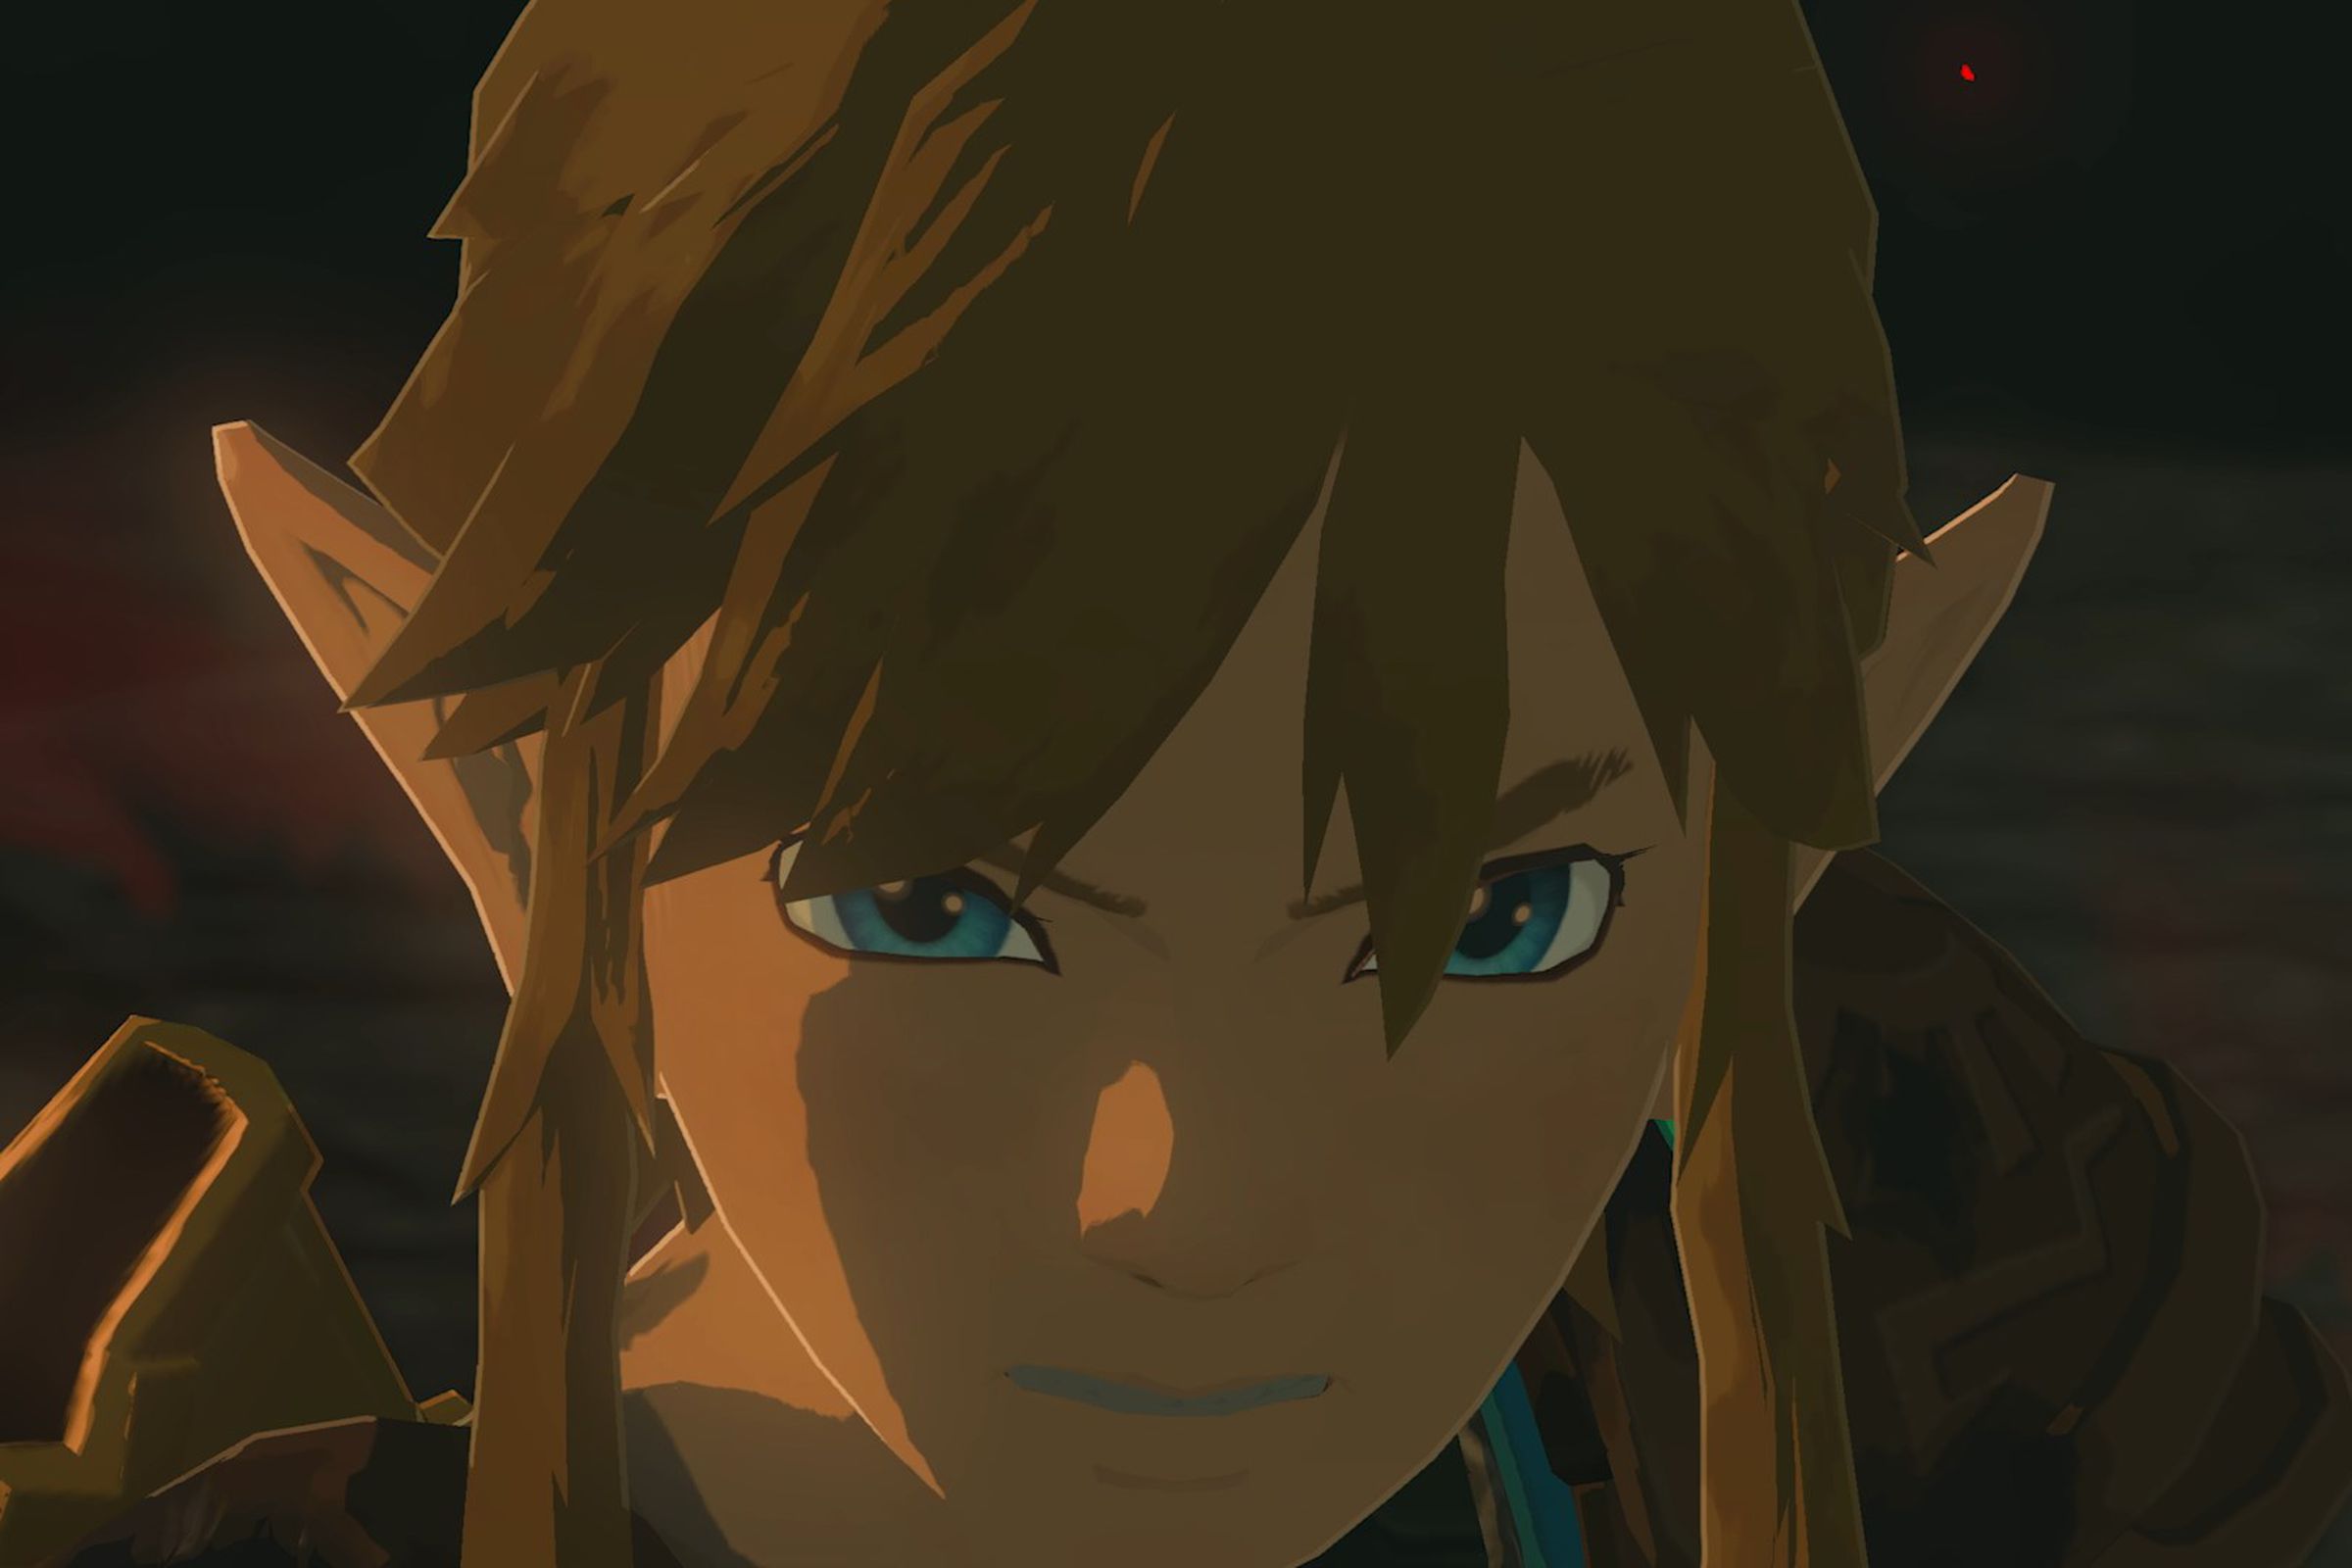 A screenshot from the video game The Legend of Zelda: Tears of the Kingdom.